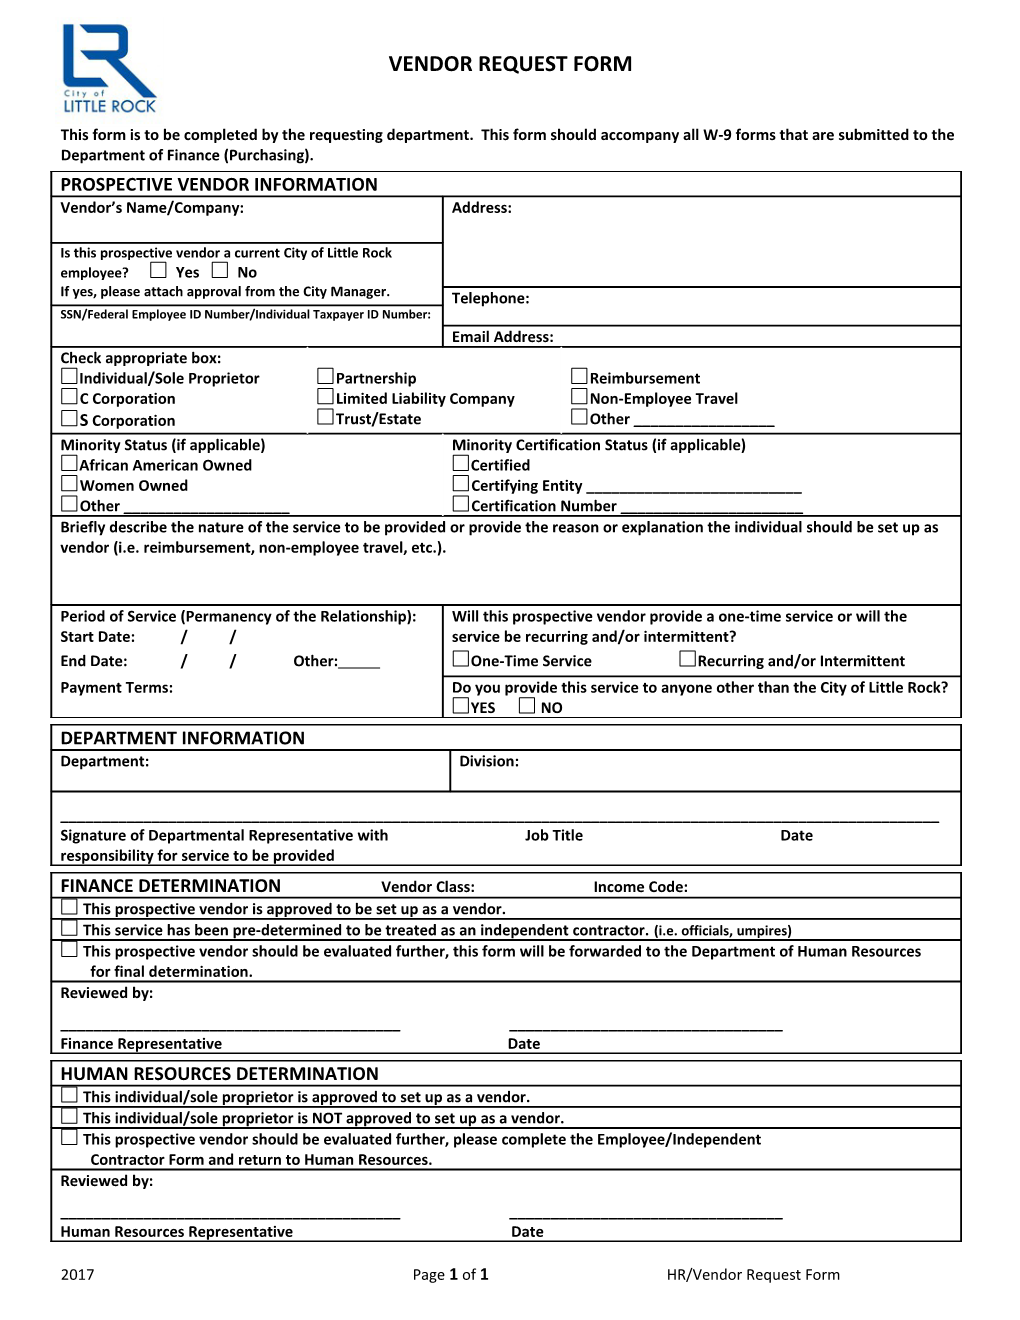 This Form Is to Be Completed by the Requesting Department. This Form Should Accompany